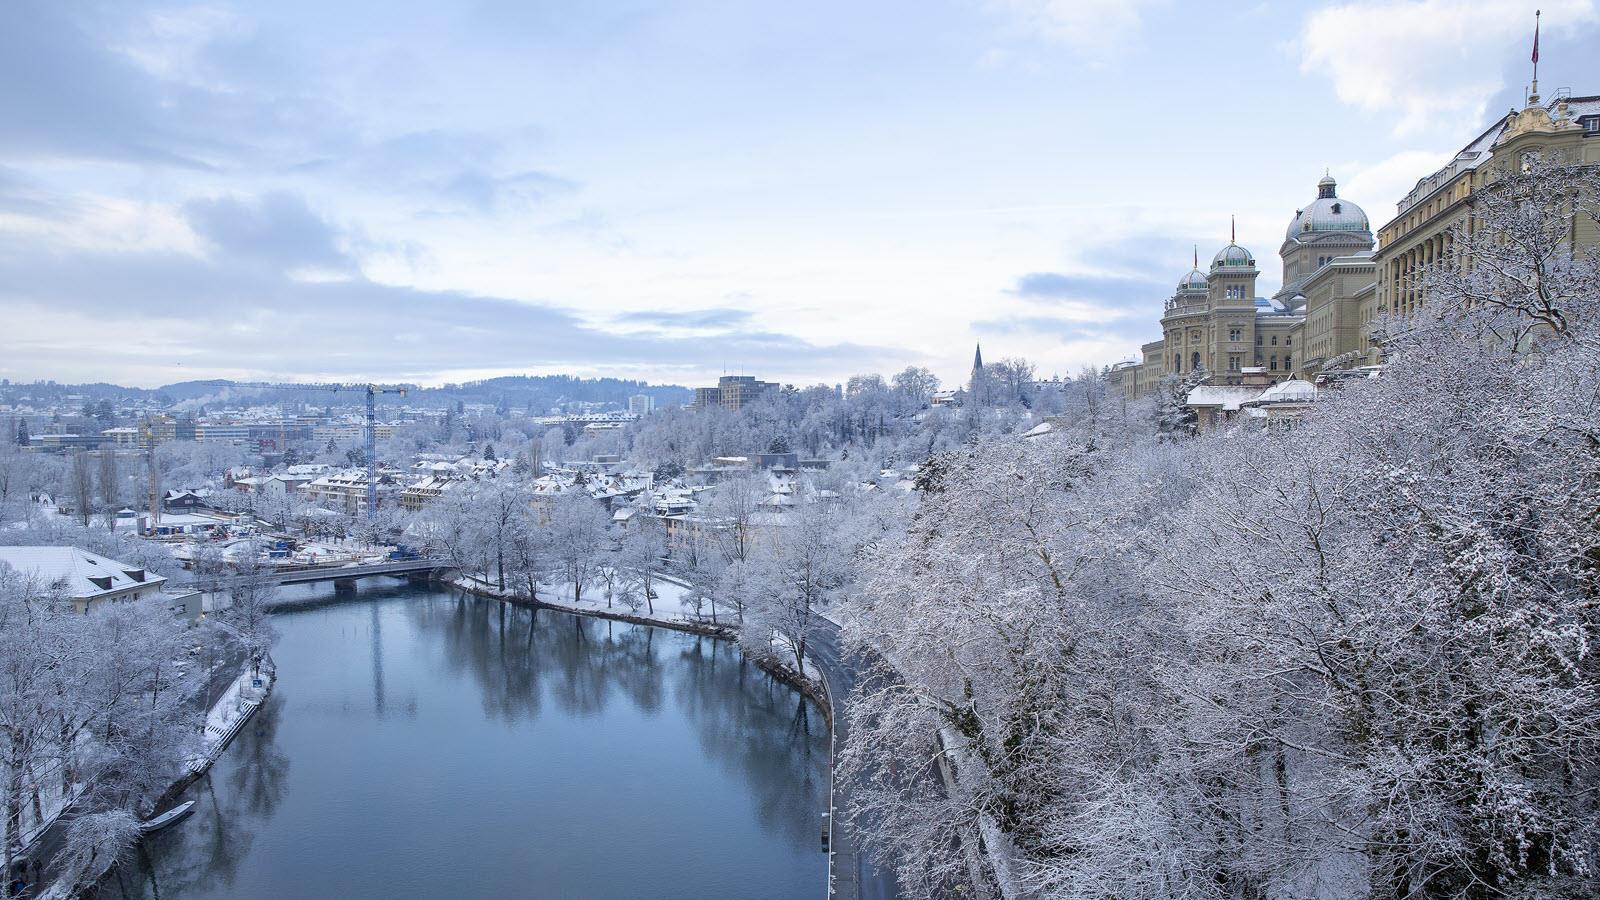 A frosty Bern, Switzerland, along the Aare River with ice-coated trees.